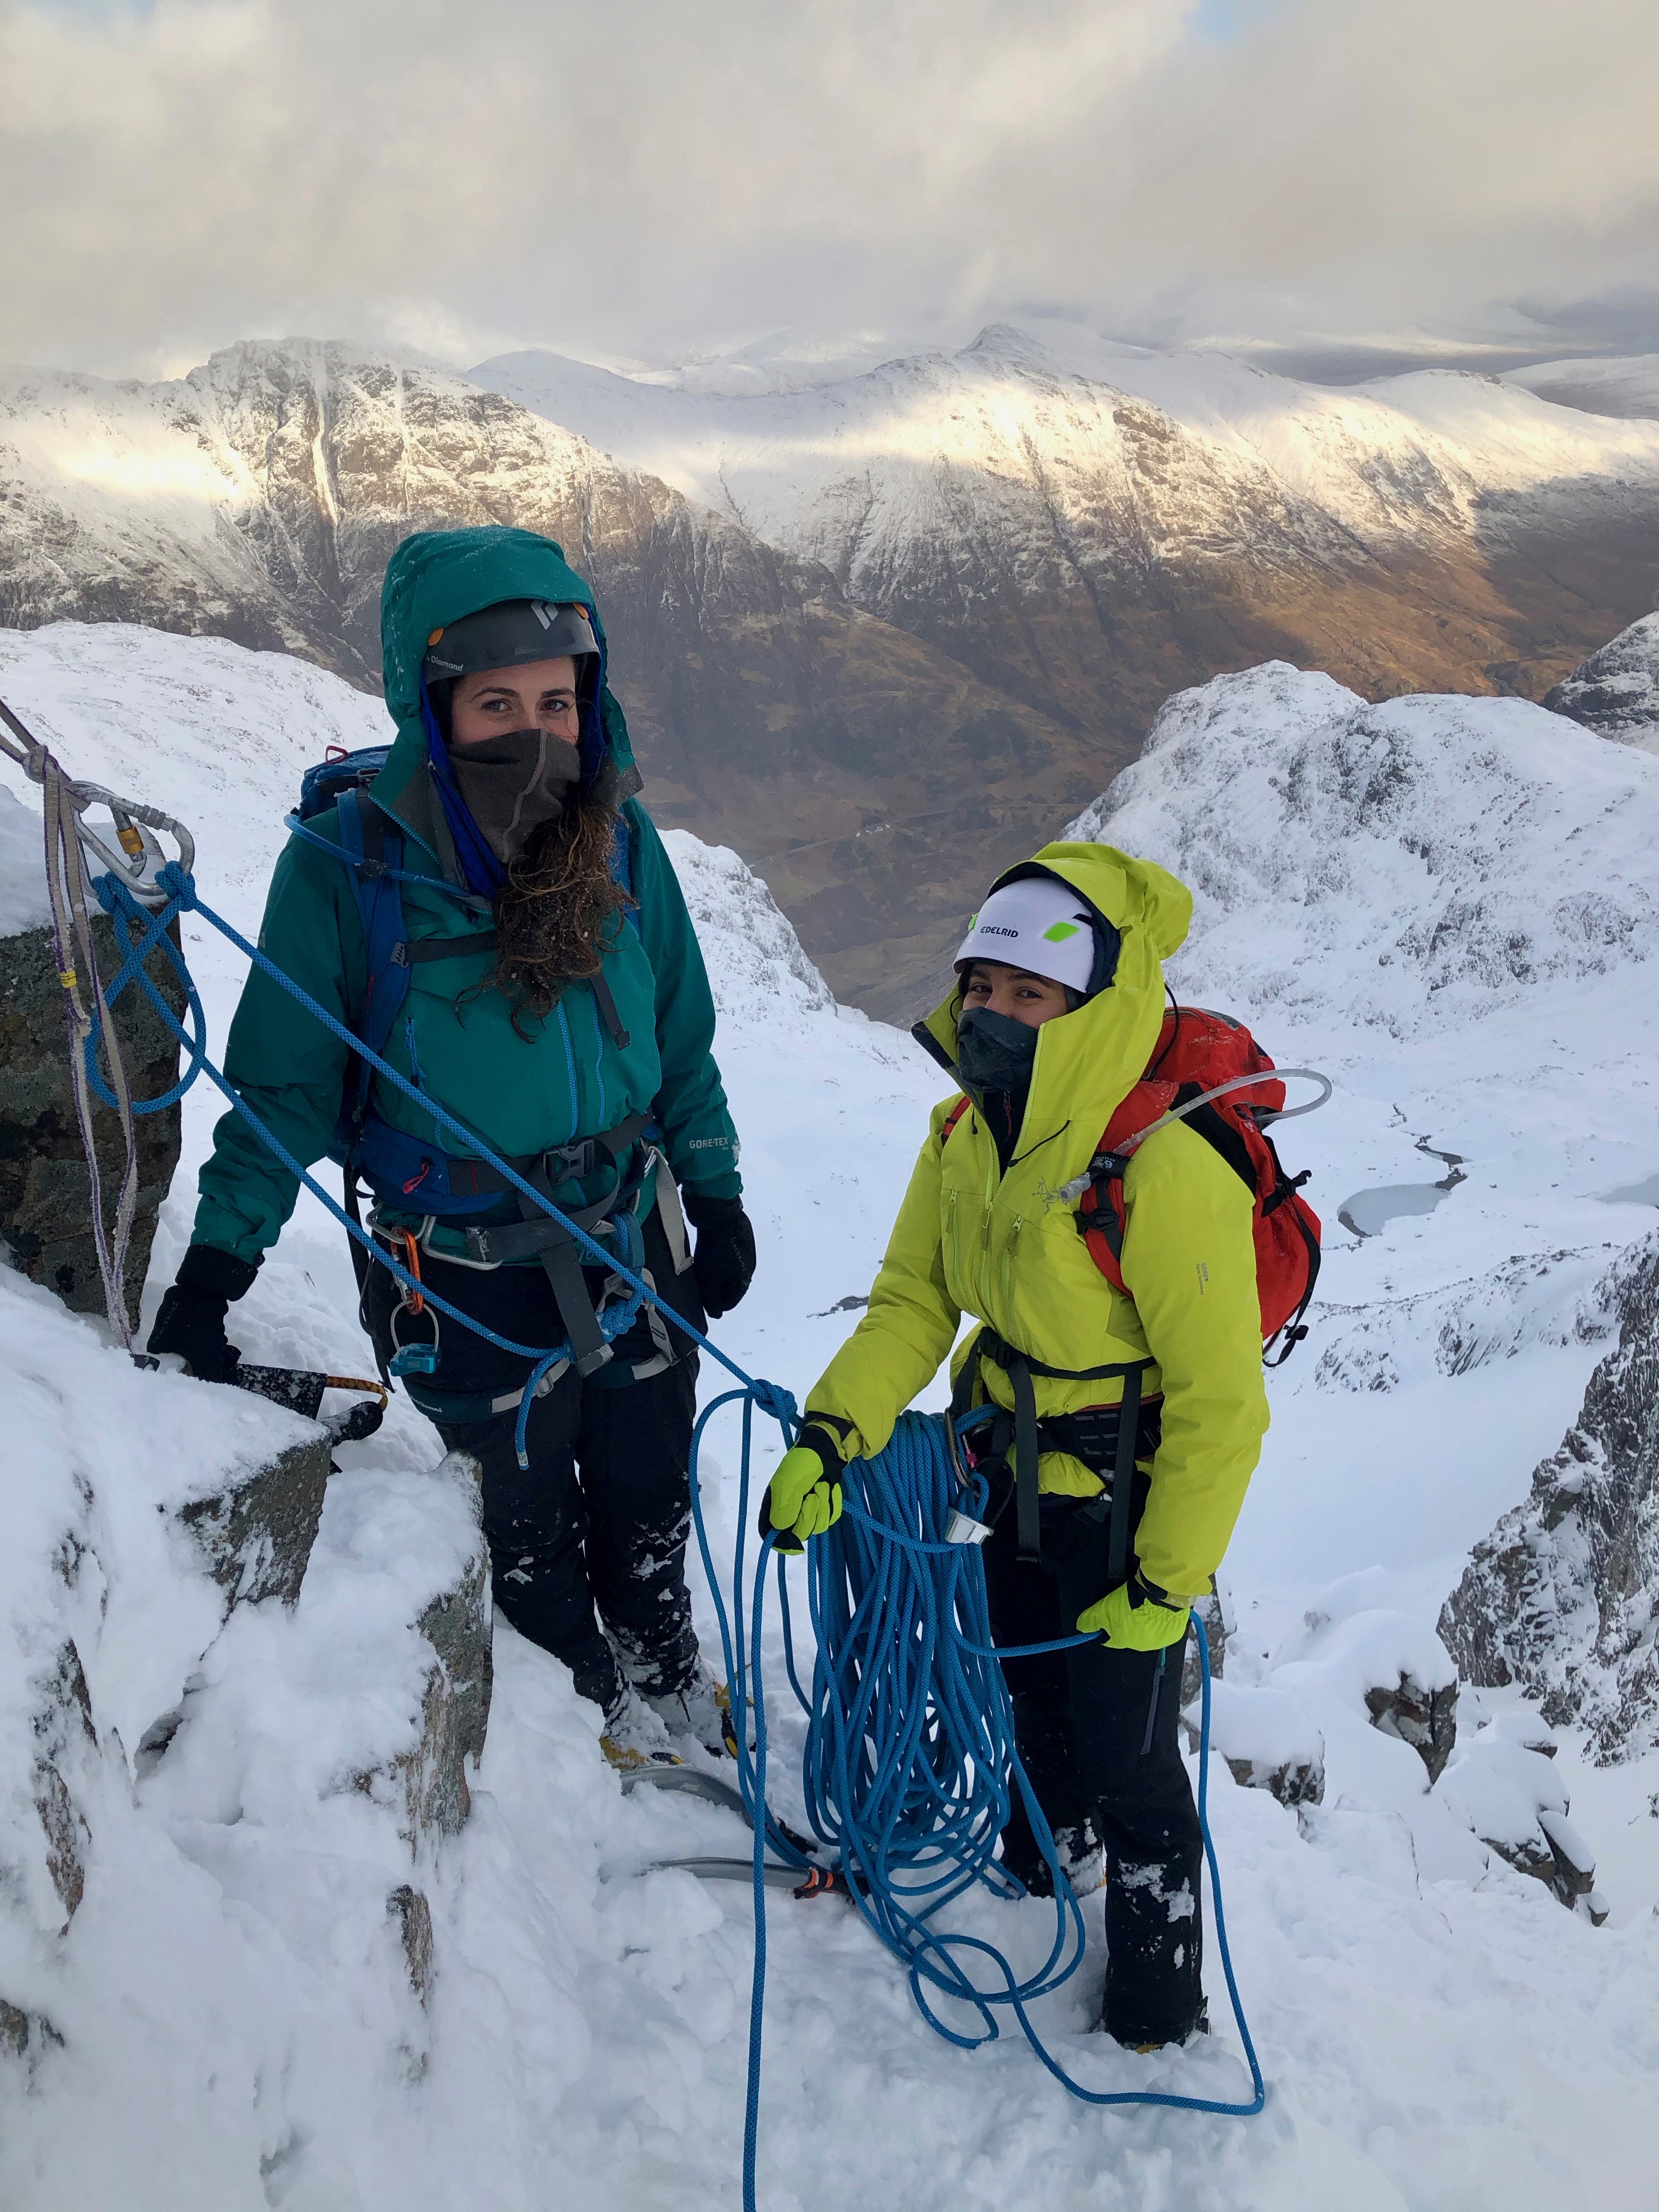 Two climbers at a belay stance high up on Dorsal Arete in Glencoe on a winter mountaineering course